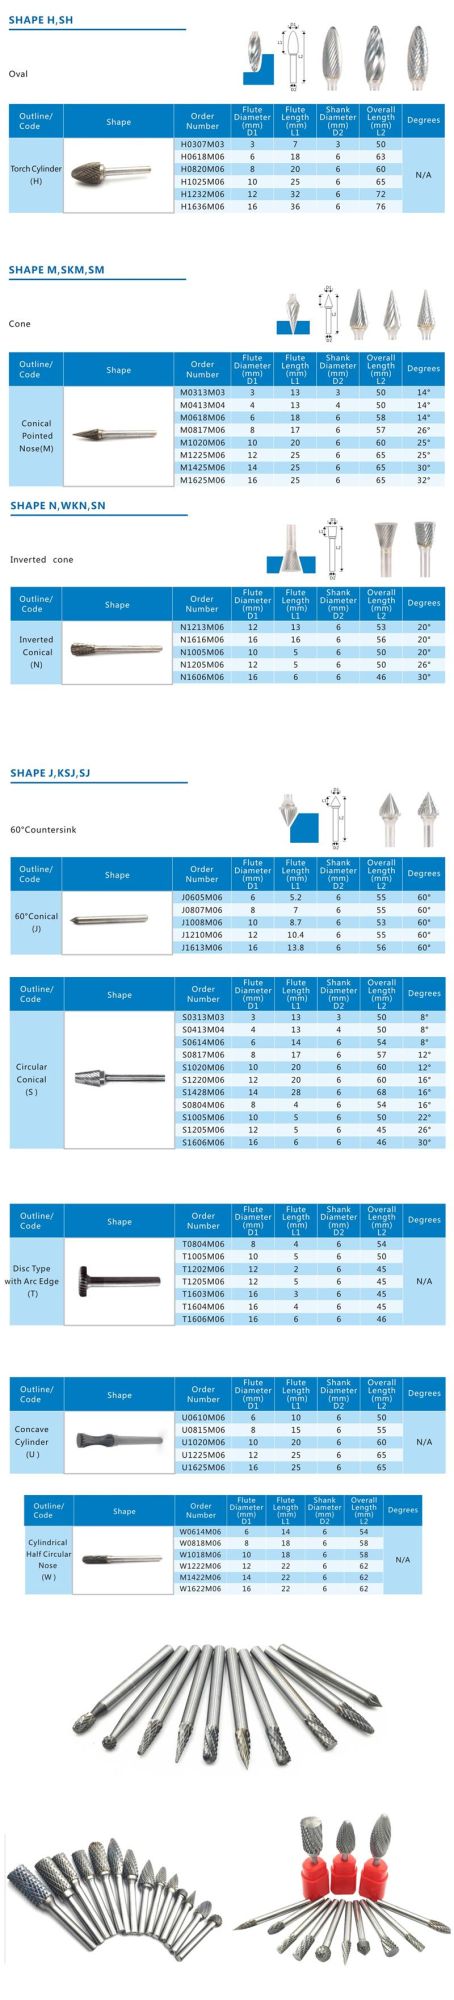 Tungsten Carbide Rotary Burrs with High Hardness and Wear Resistance